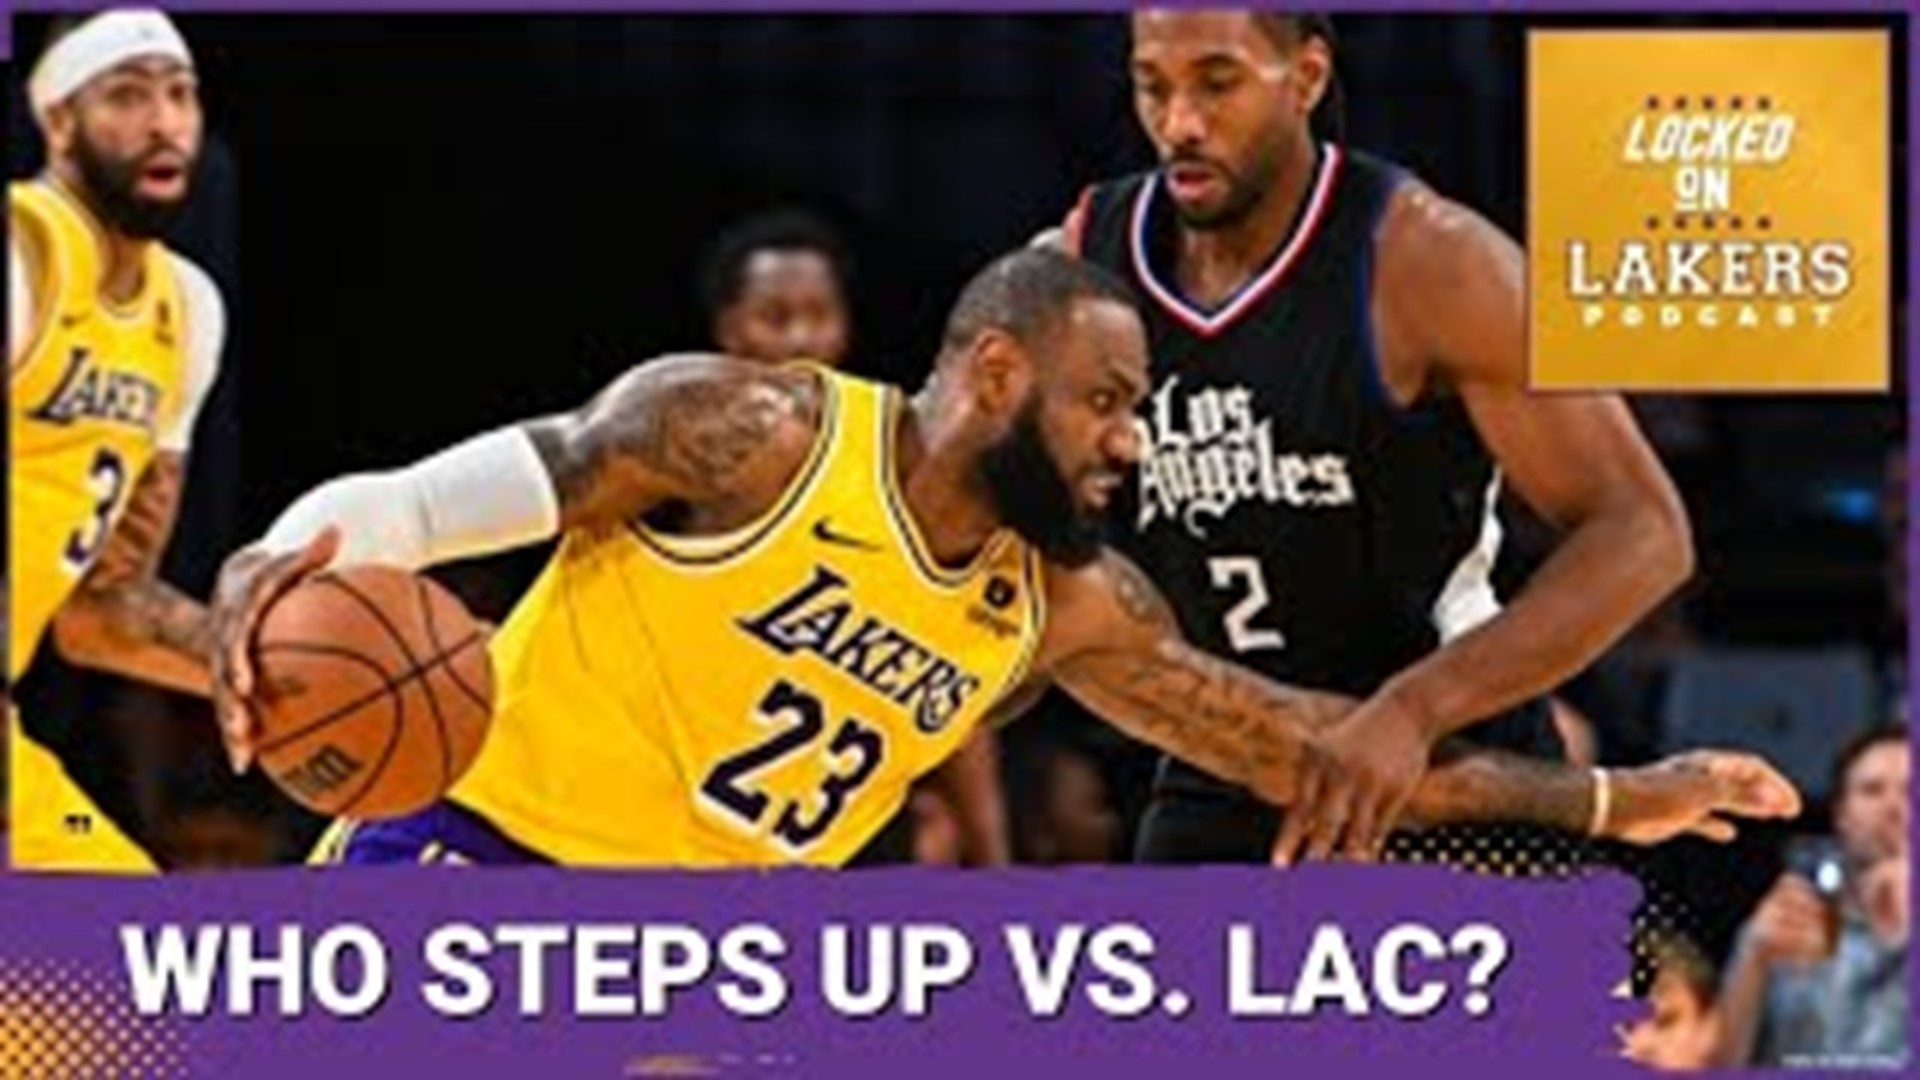 The Lakers face a critical game tonight against the Clippers, and it comes at a time when the vibes again have turned ominous and the team needs to change the convo.